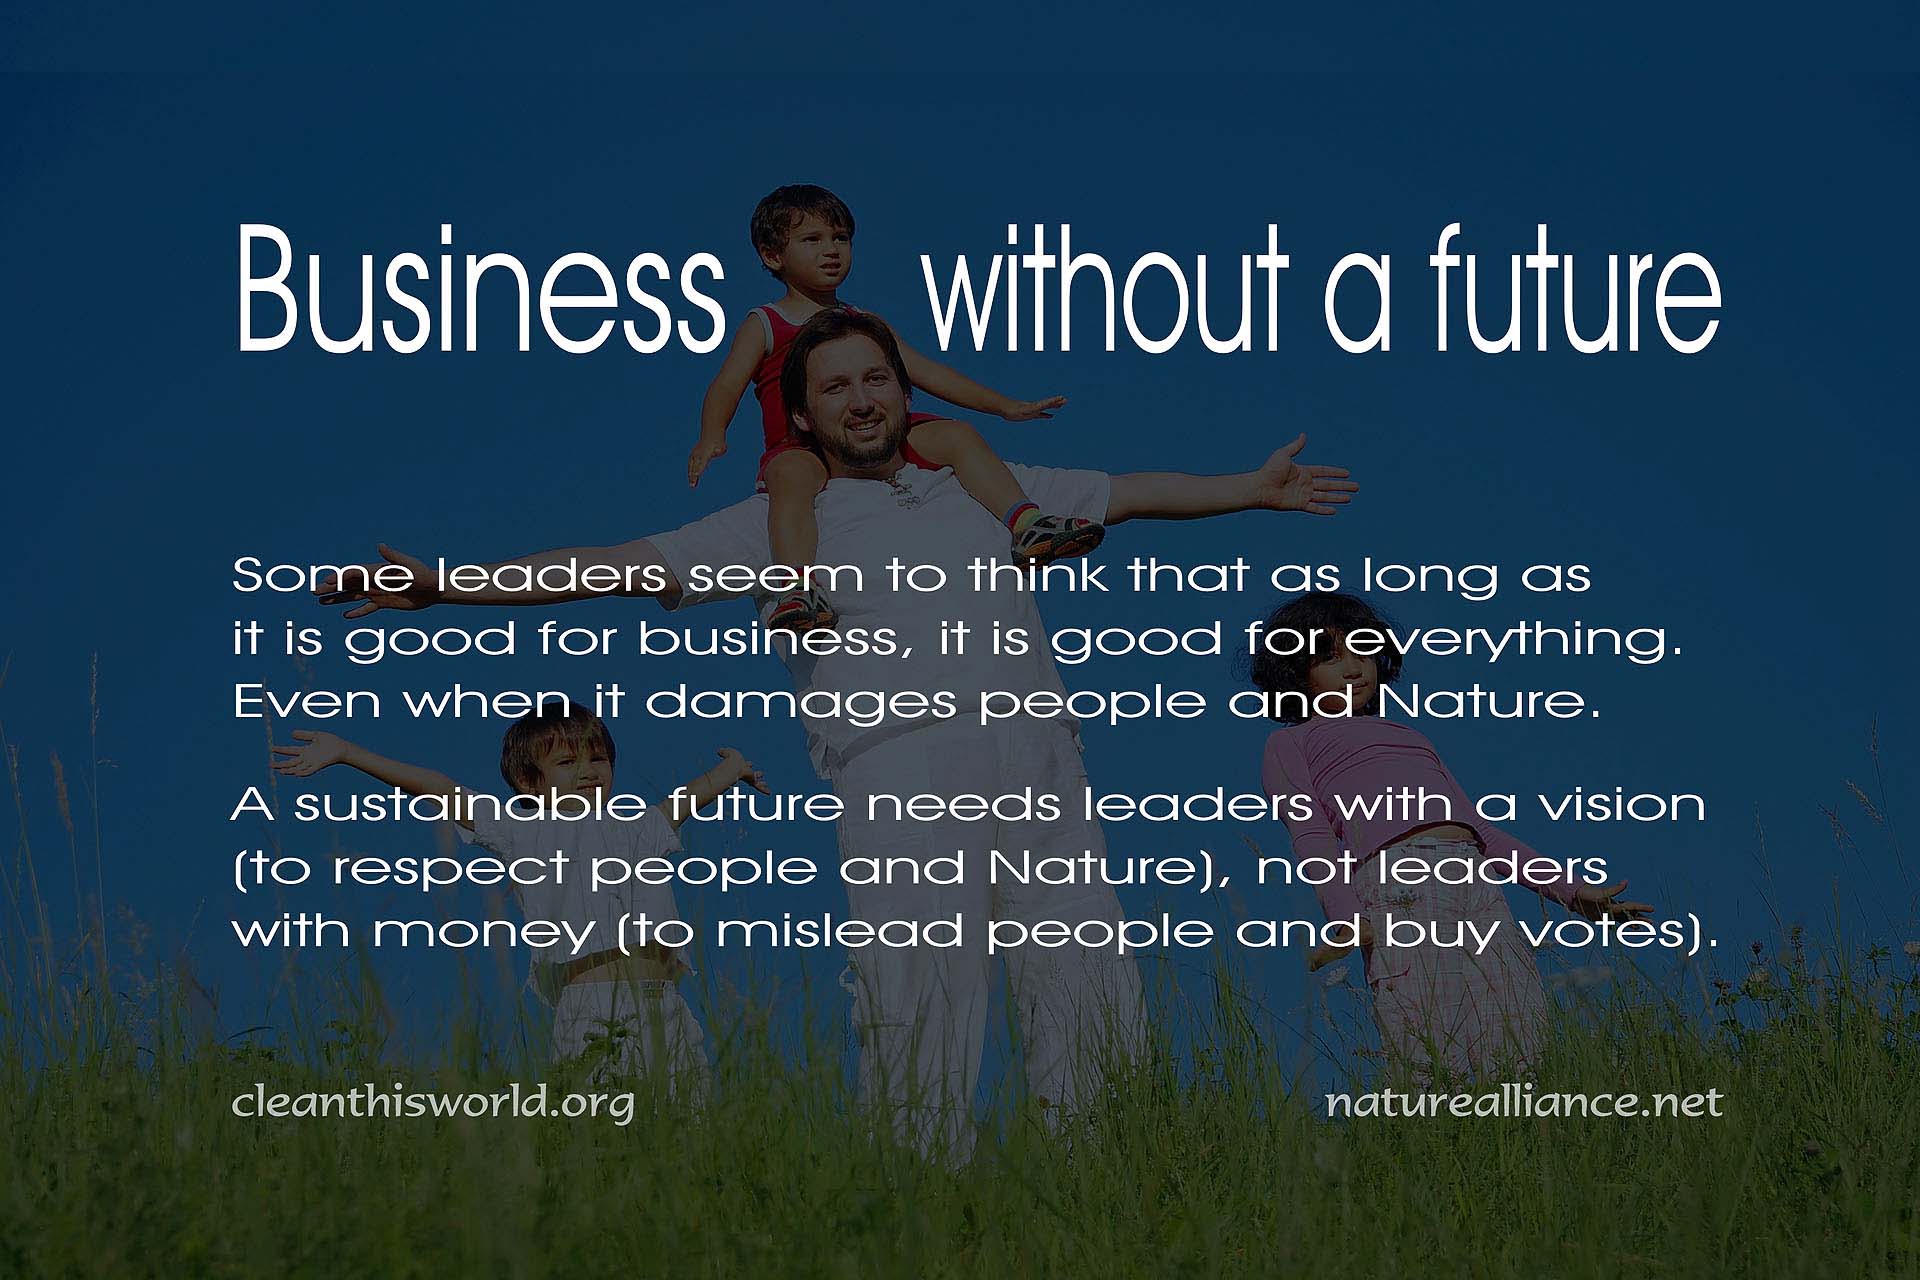 Business without a future